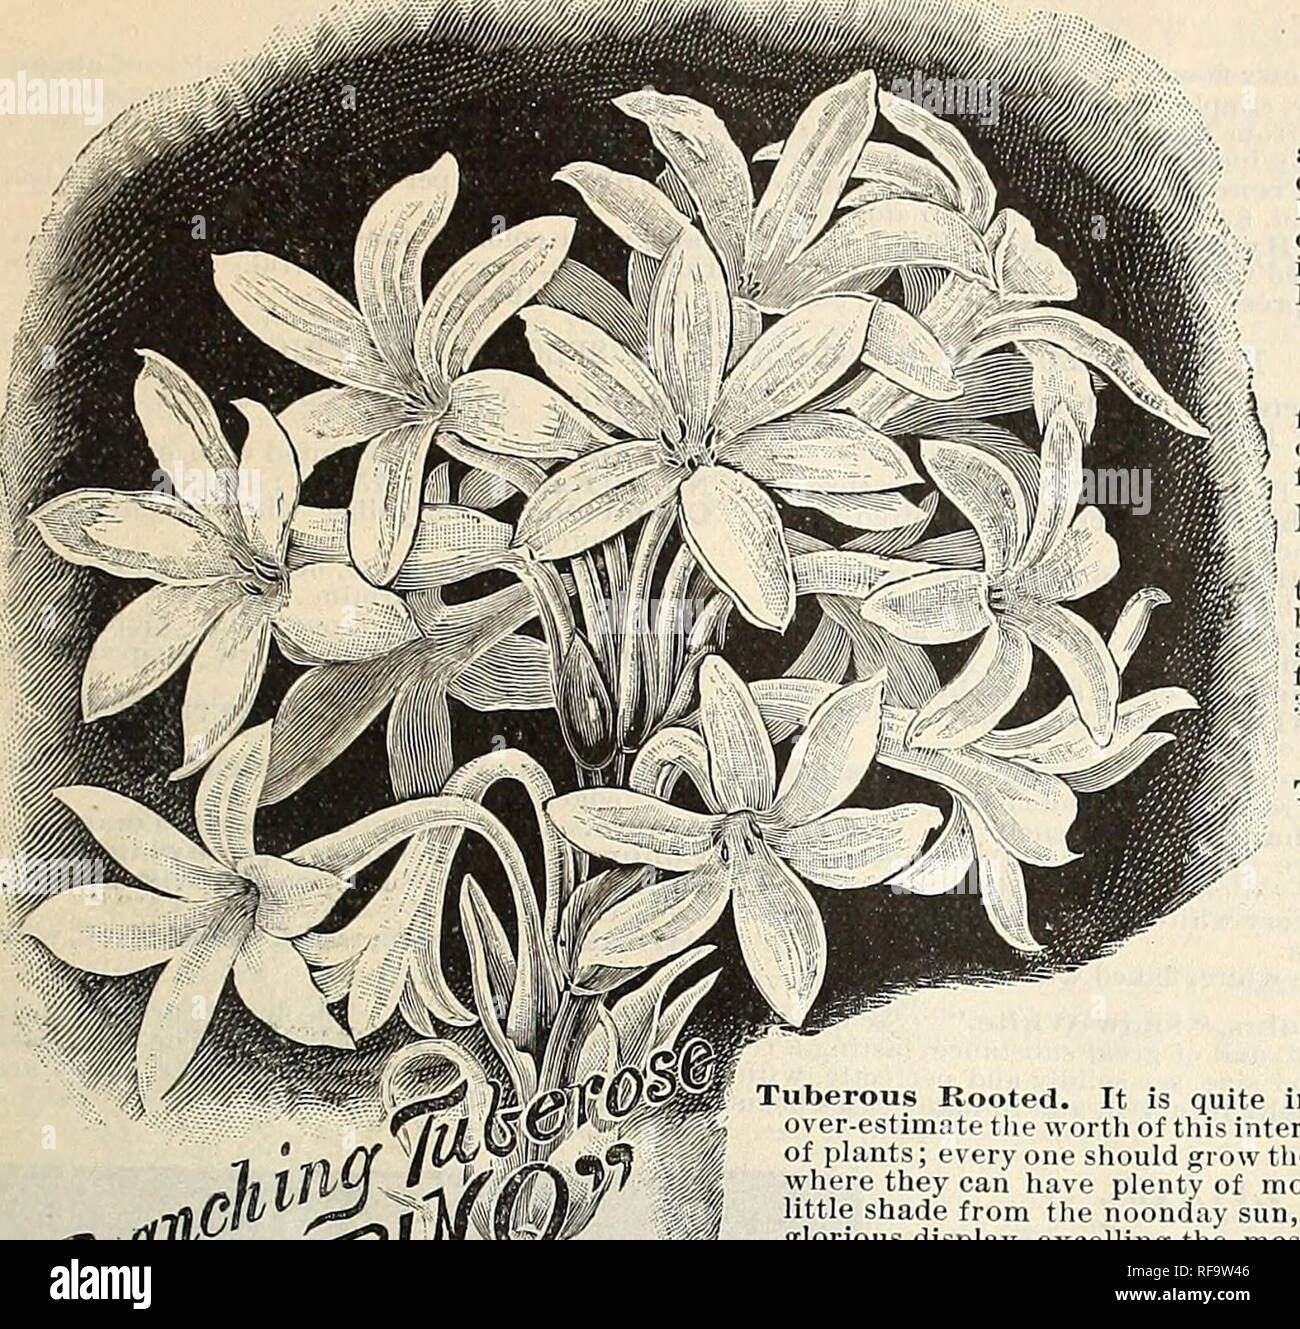 . Catalogue of home grown seeds. Gardening United States Equipment and supplies Catalogs; Vegetables Seeds United States Catalogs; Flowers Seeds United States Catalogs; Fruit Seeds United States Catalogs; Grain Seeds Catalogs; Gardening Implements Catalogs. JAMES J. H. GREGORY &amp; SON'S RETAIL CATALOGUE. 65 SUMMER FLOWERING VINES, BULBS, SHRUBS, AND PLANTS.—continued. RUDBECKIA LACINIATA, GOLDEN GLOW.&quot; ). Price, Single, — scarlet, white, yellow, pink,- Four, one of each, 30 cents; twelve, three of Price, Double, — scarlet, white, yellow, pink Four, one of each, 55 cents; twelve, three o Stock Photo